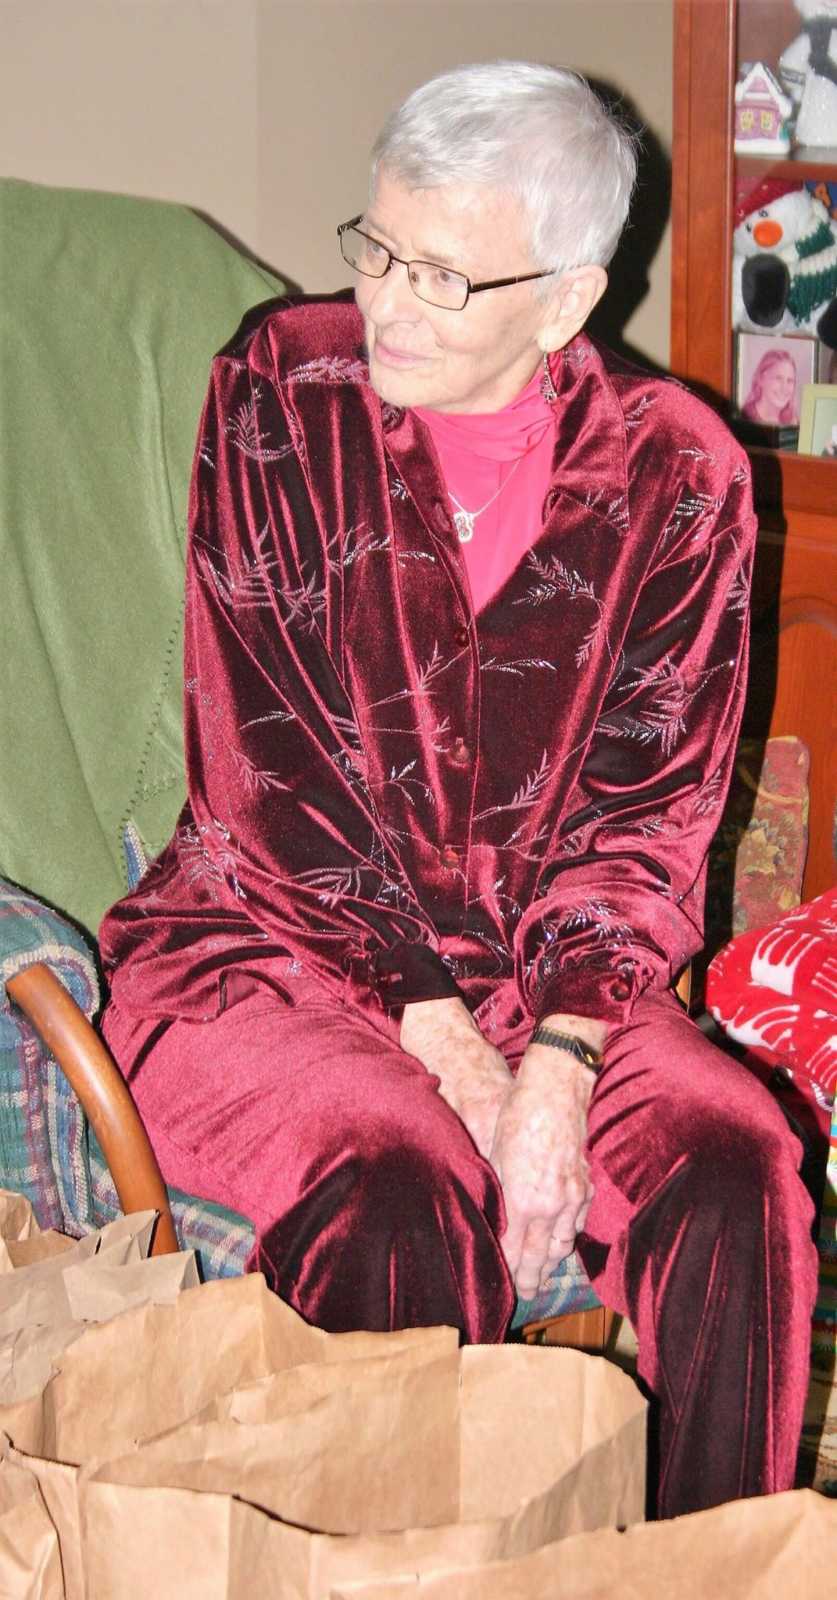 Elderly woman with dementia sits in chair at home wearing red velvet outfit for Christmas